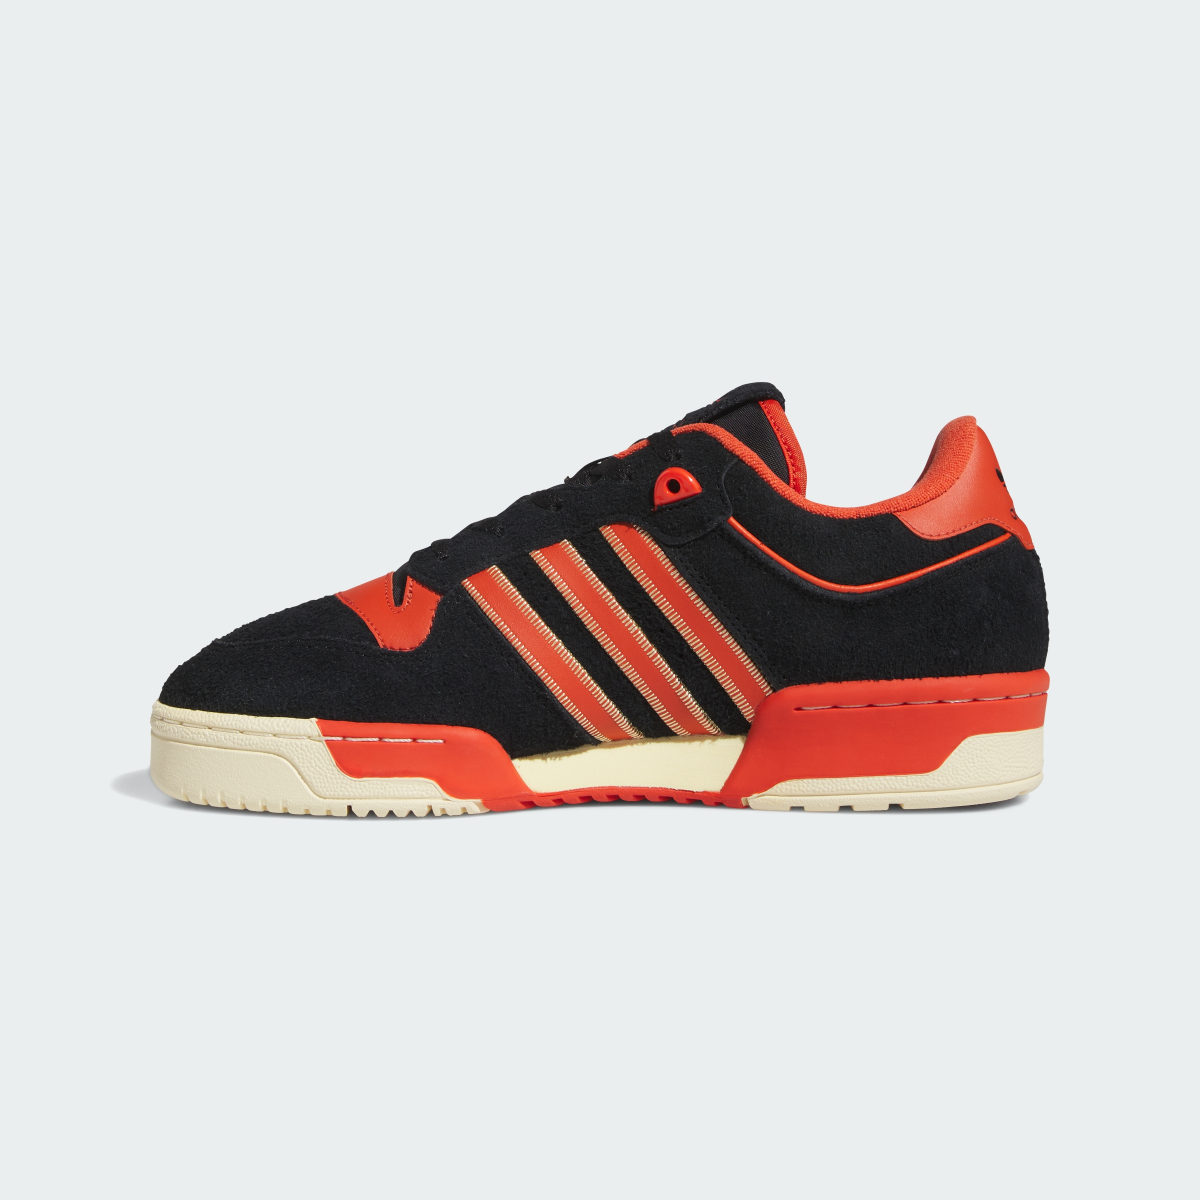 Adidas Rivalry 86 Low Schuh. 7